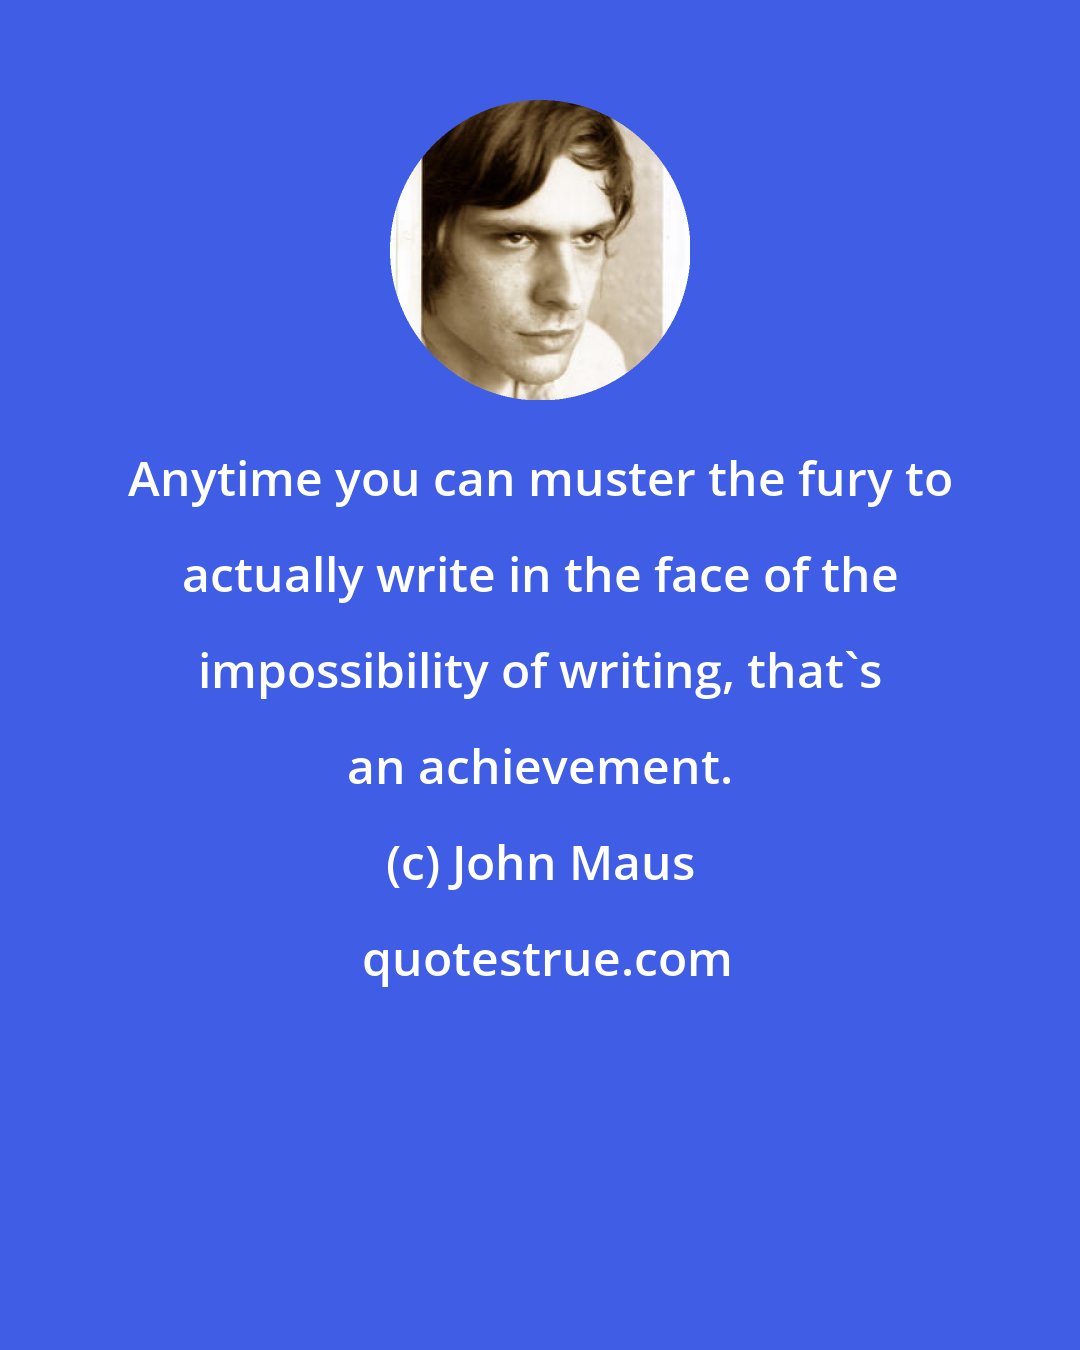 John Maus: Anytime you can muster the fury to actually write in the face of the impossibility of writing, that's an achievement.